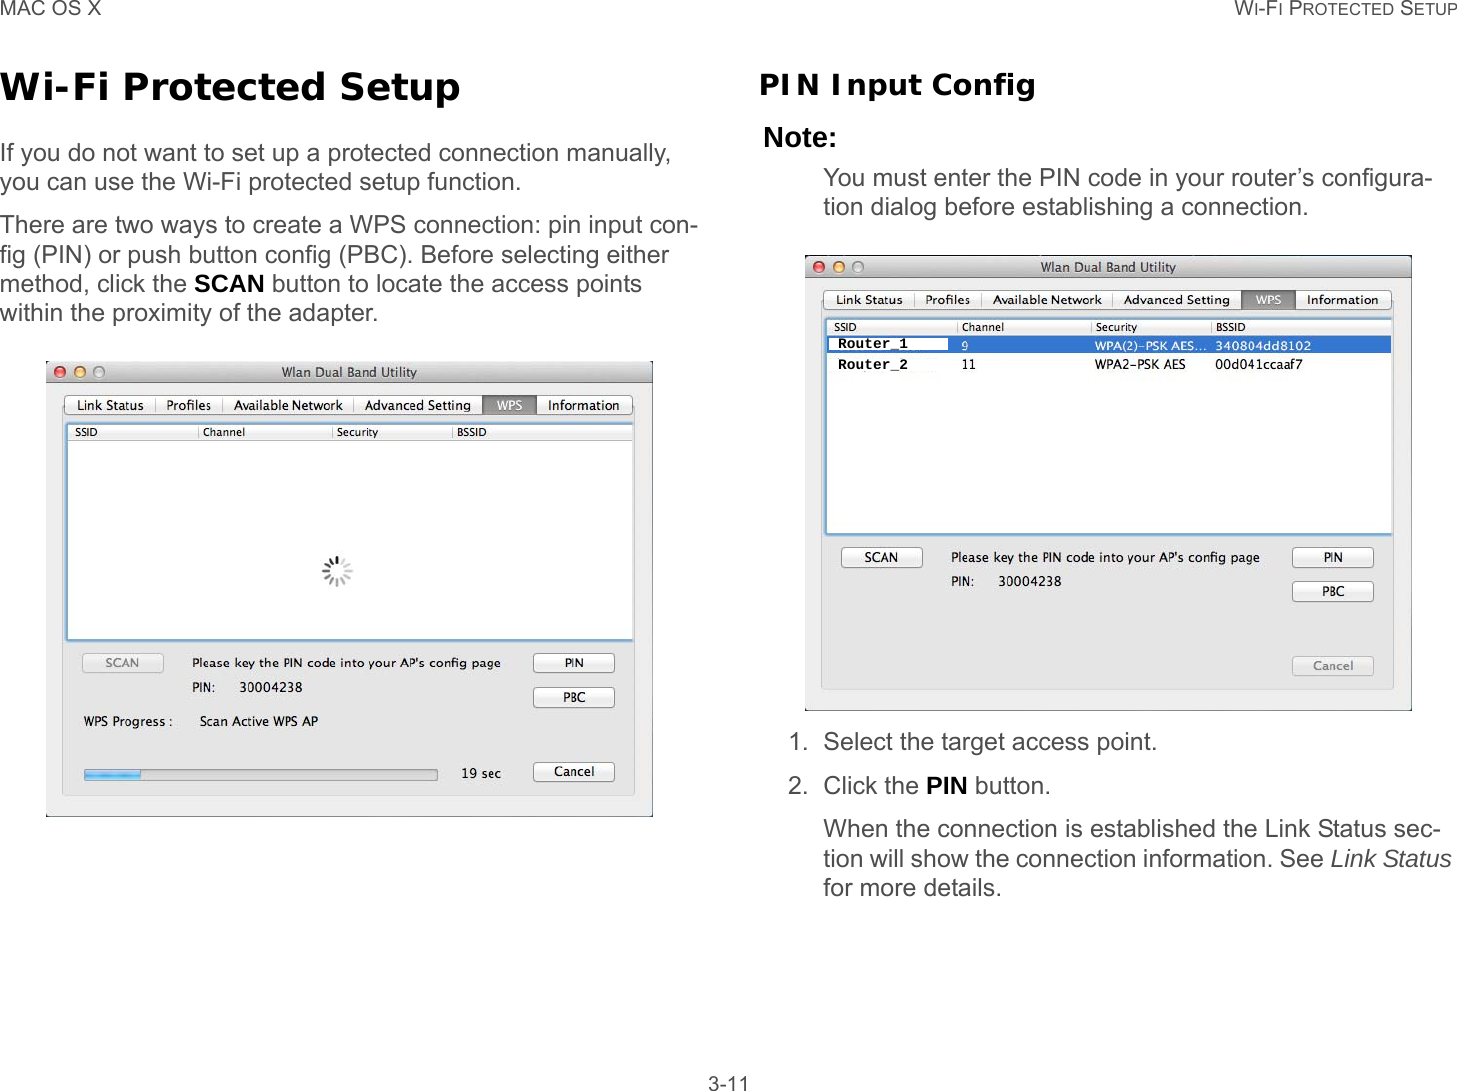 MAC OS X WI-FI PROTECTED SETUP 3-11Wi-Fi Protected SetupIf you do not want to set up a protected connection manually, you can use the Wi-Fi protected setup function.There are two ways to create a WPS connection: pin input con-fig (PIN) or push button config (PBC). Before selecting either method, click the SCAN button to locate the access points within the proximity of the adapter.PIN Input ConfigNote:You must enter the PIN code in your router’s configura-tion dialog before establishing a connection.1. Select the target access point.2. Click the PIN button.When the connection is established the Link Status sec-tion will show the connection information. See Link Status for more details.Router_1Router_2